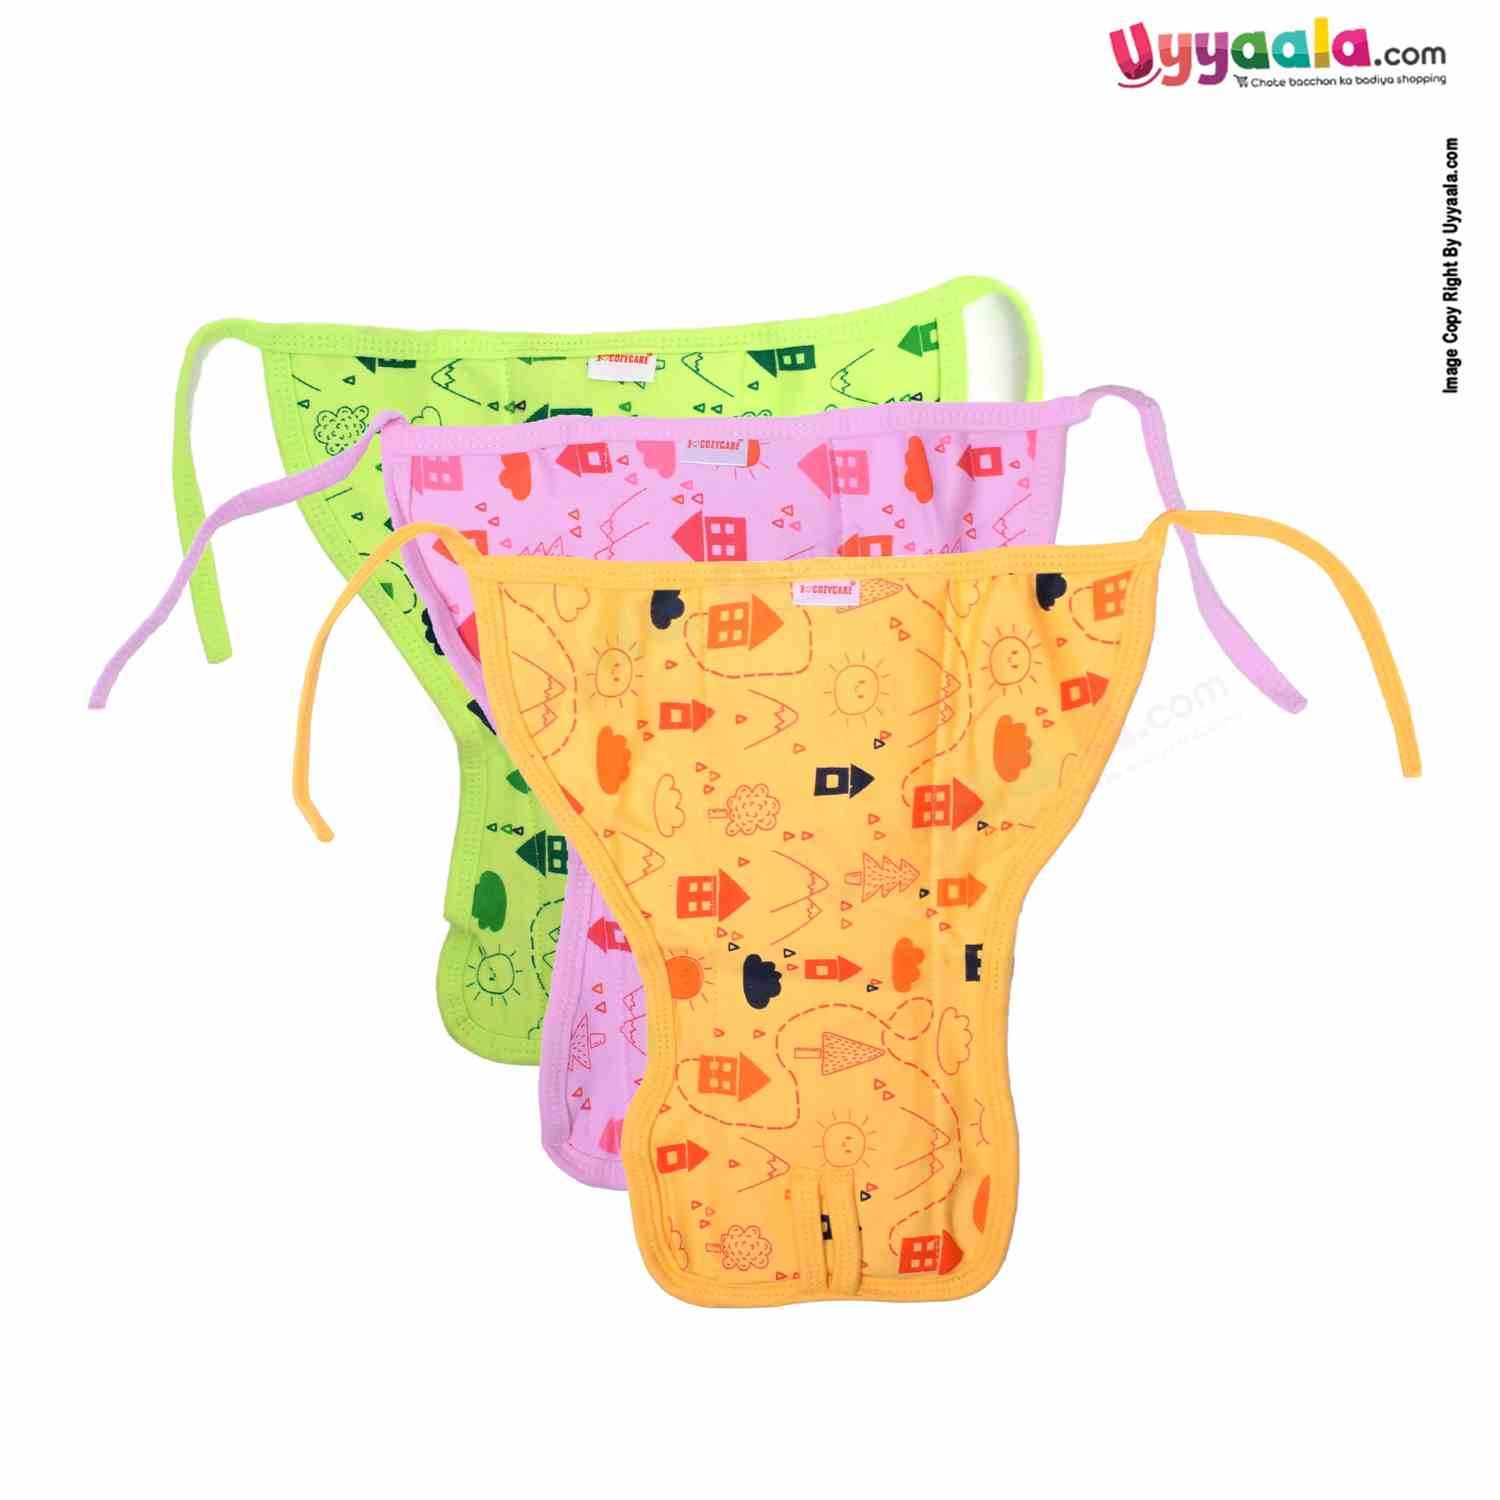 COZYCARE Washable Diapers Hosiery Tying Model House Print Green, Pink & Yellow 3P Set (XS)